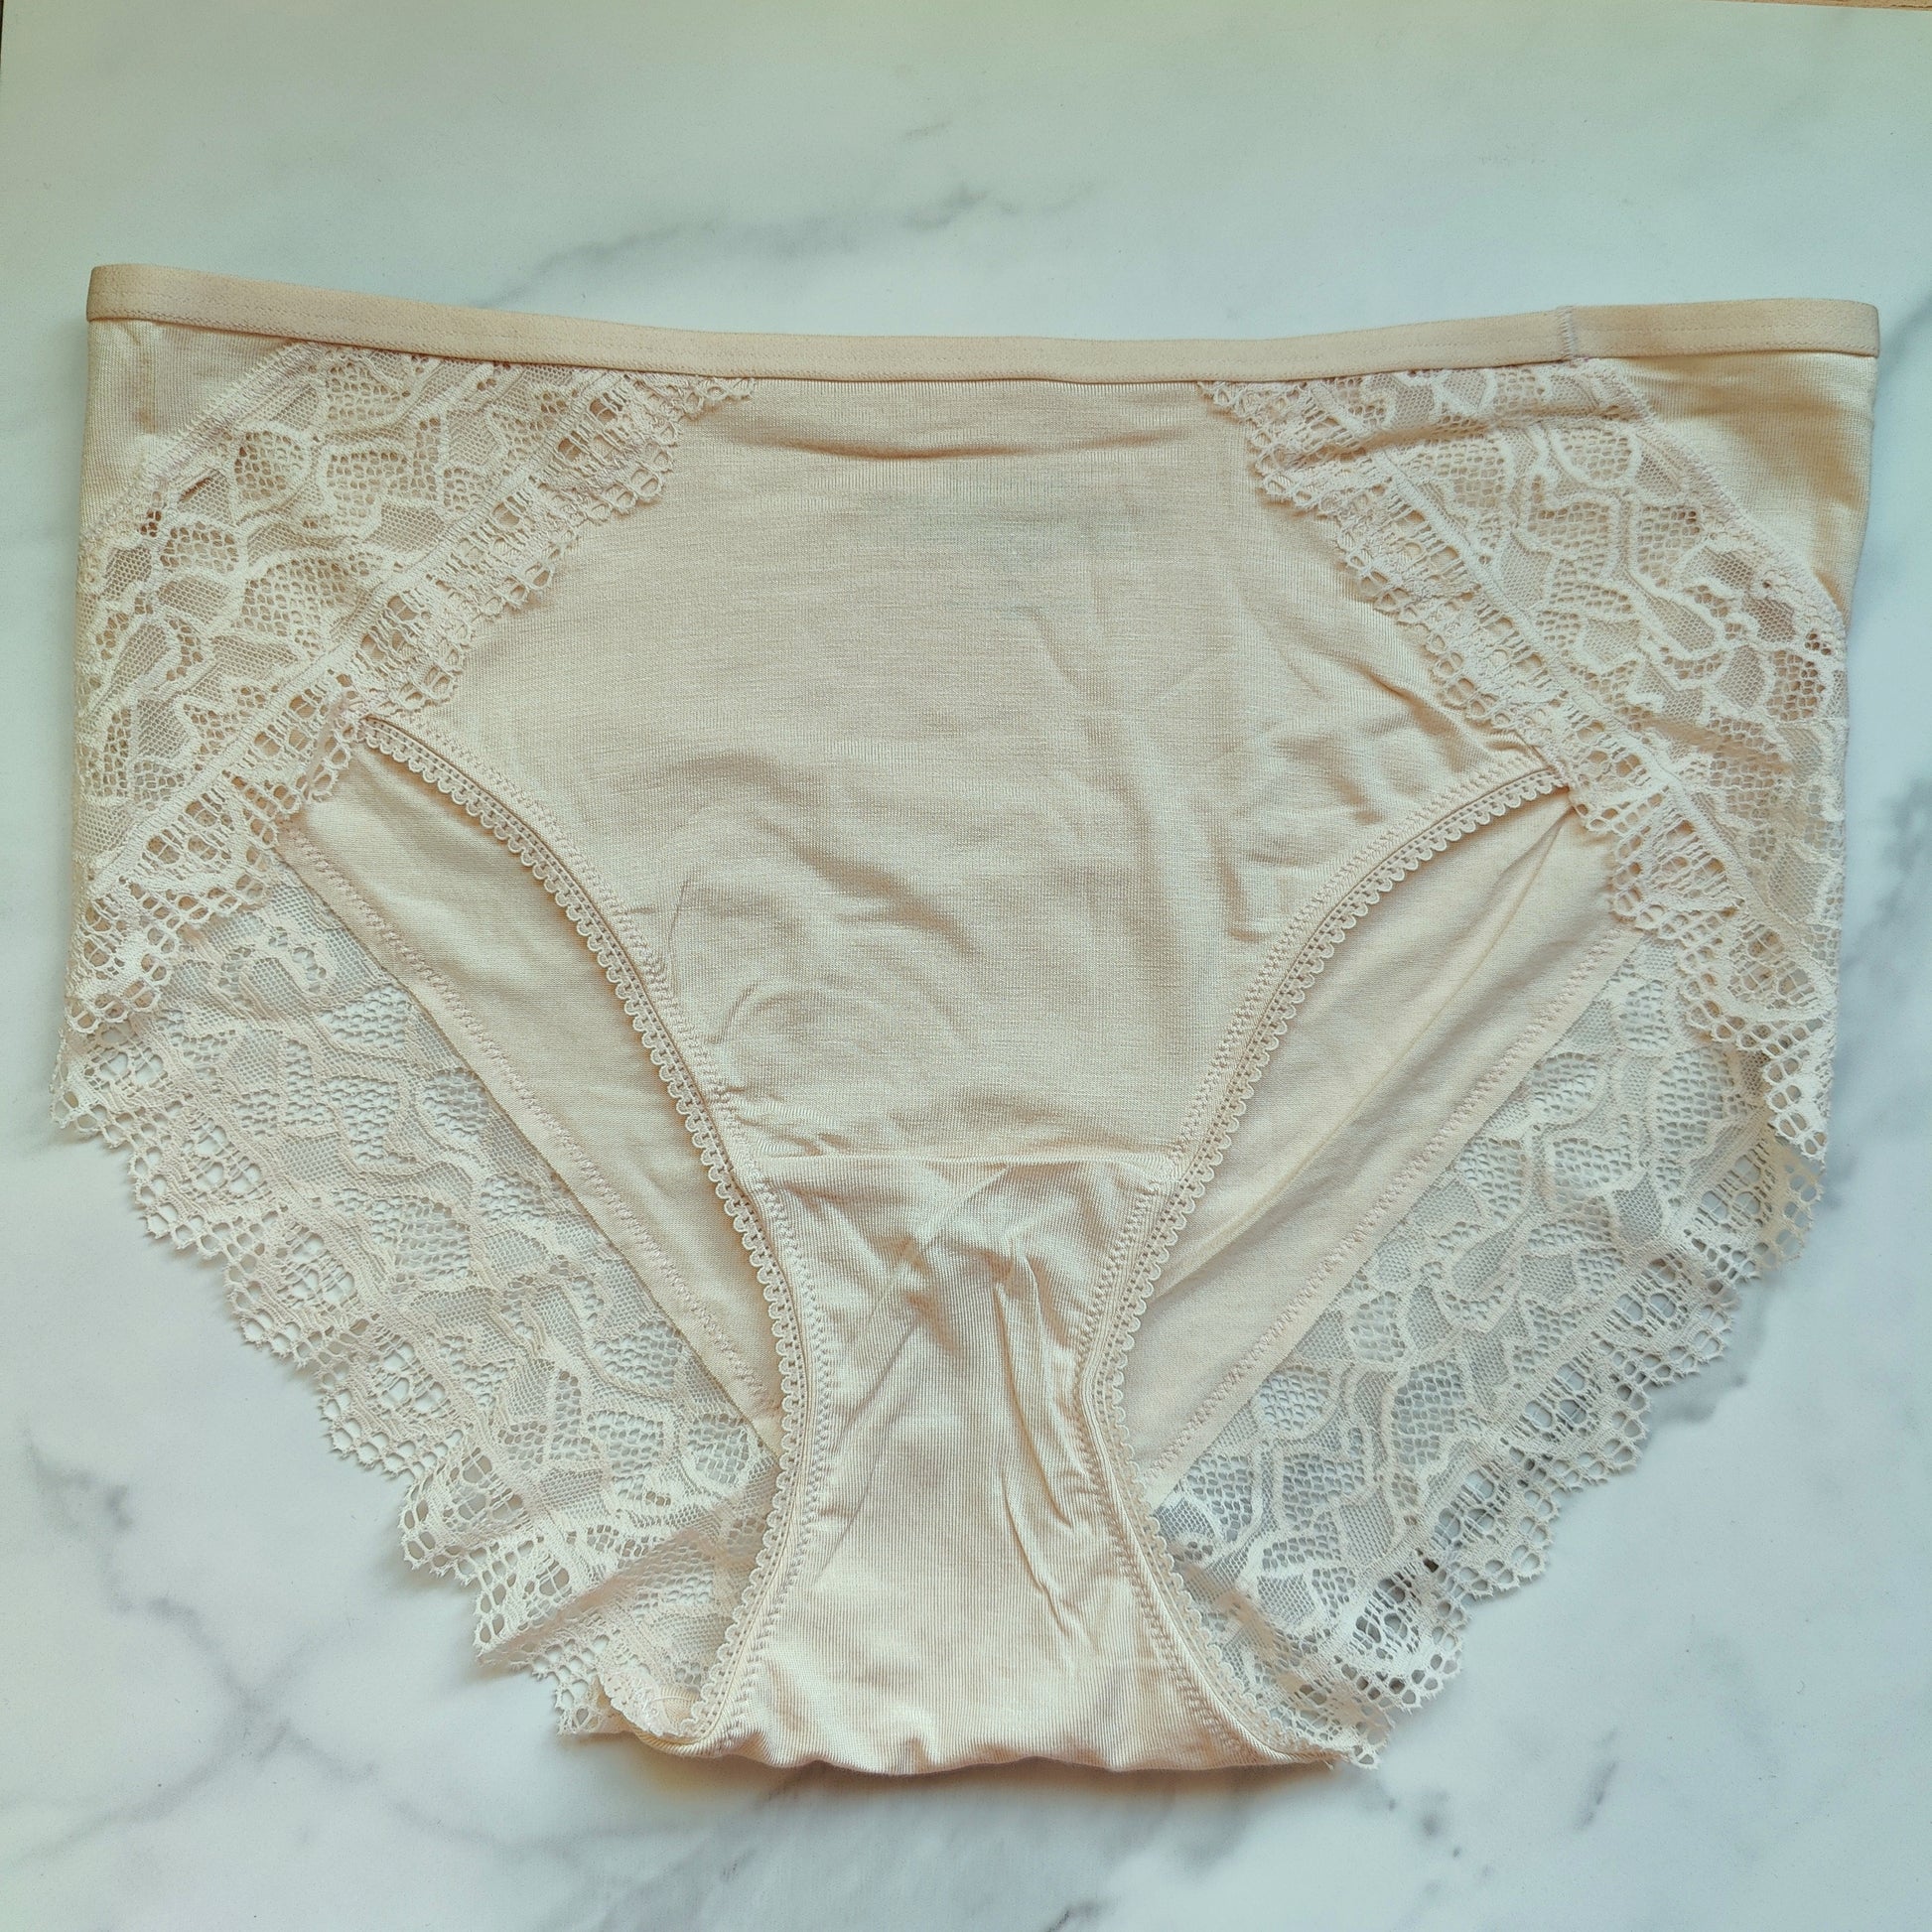 NWT SOMA Vanishing Edge Cotton Blend with Lace High-Leg Brief